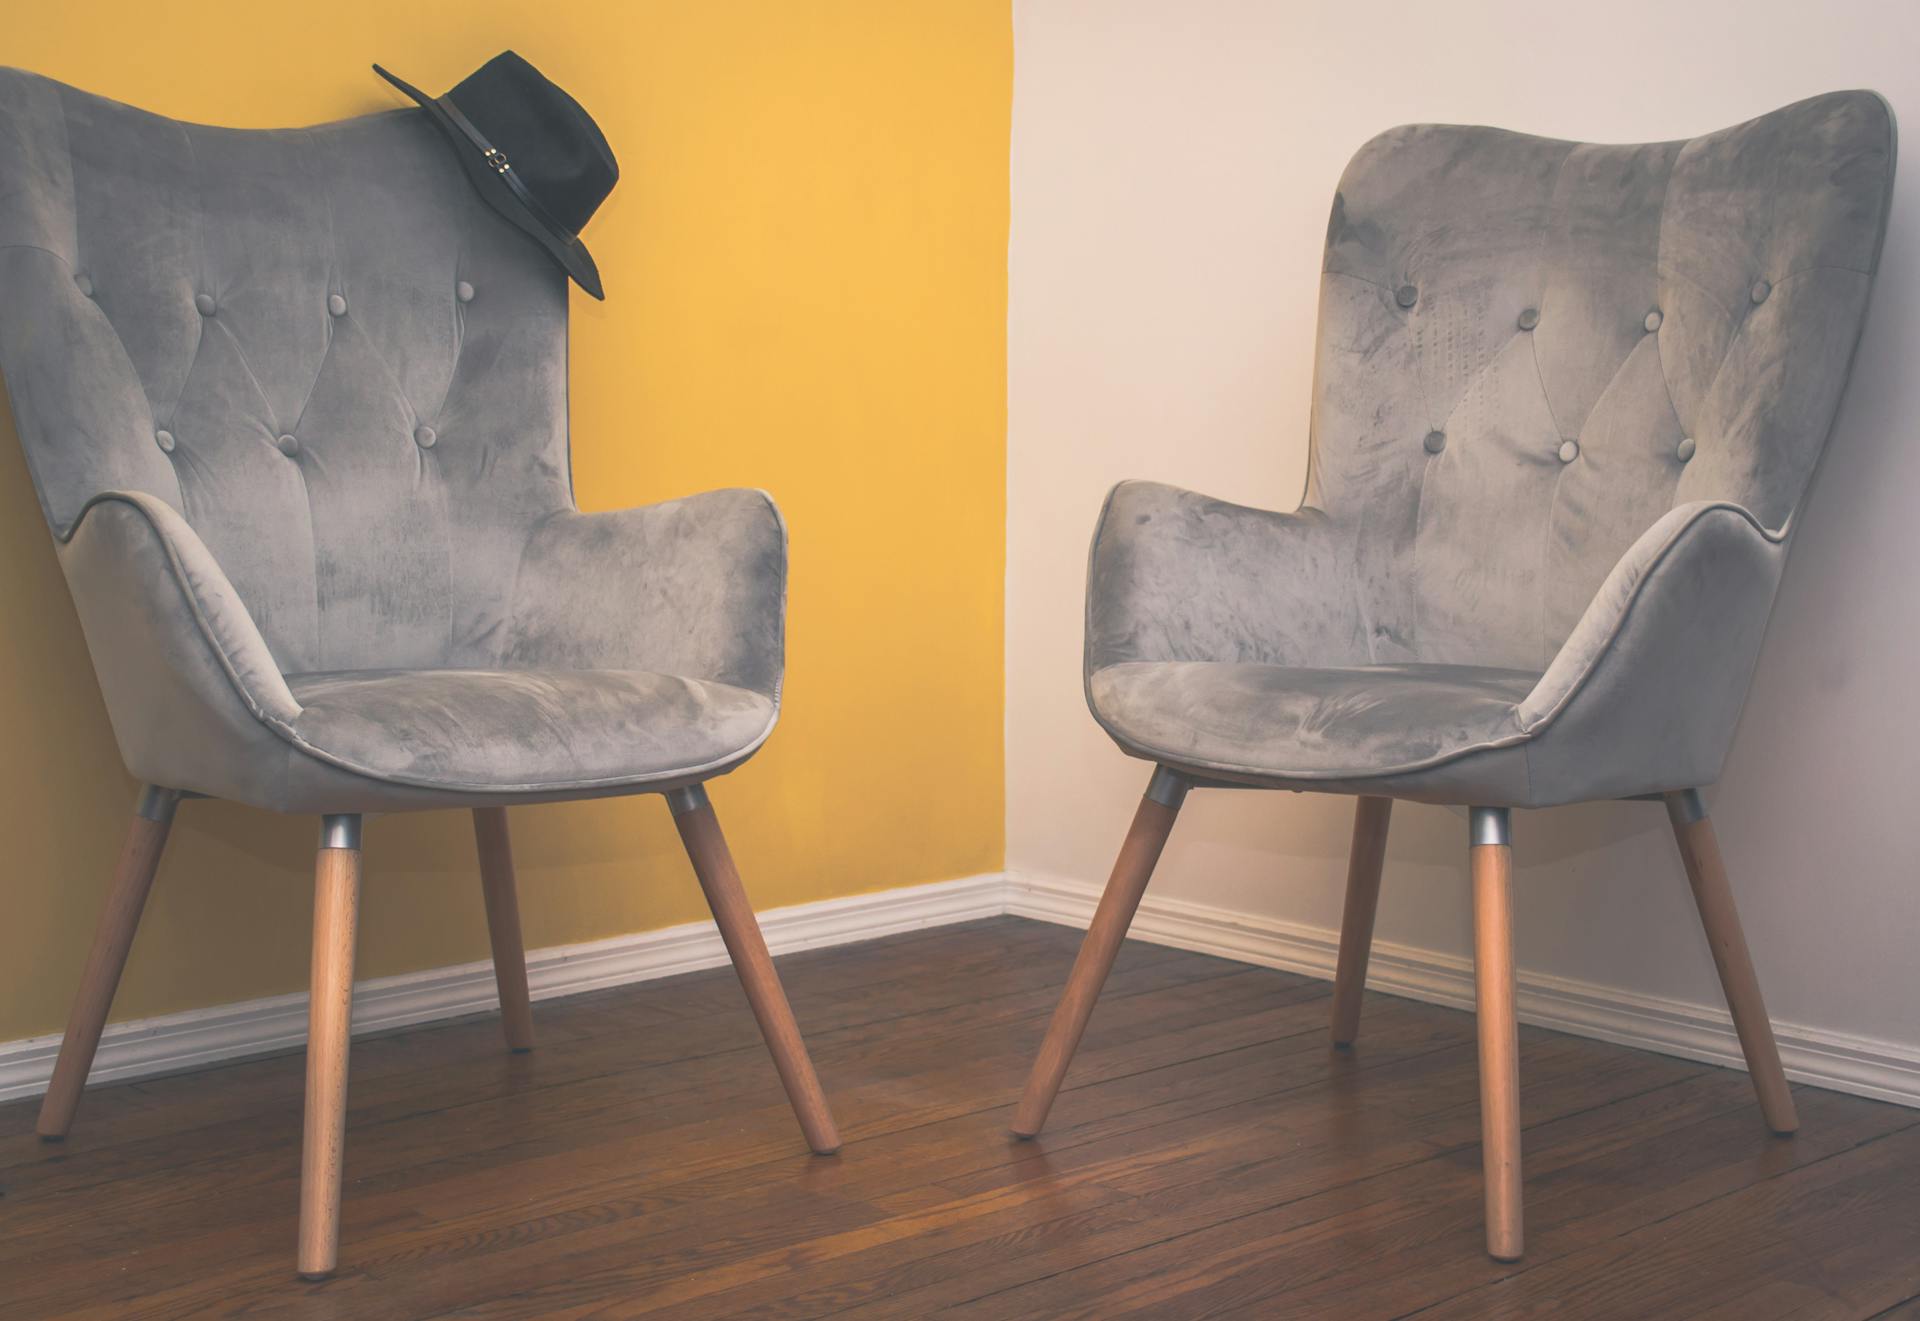 Two suede armchairs | Source: Pexels